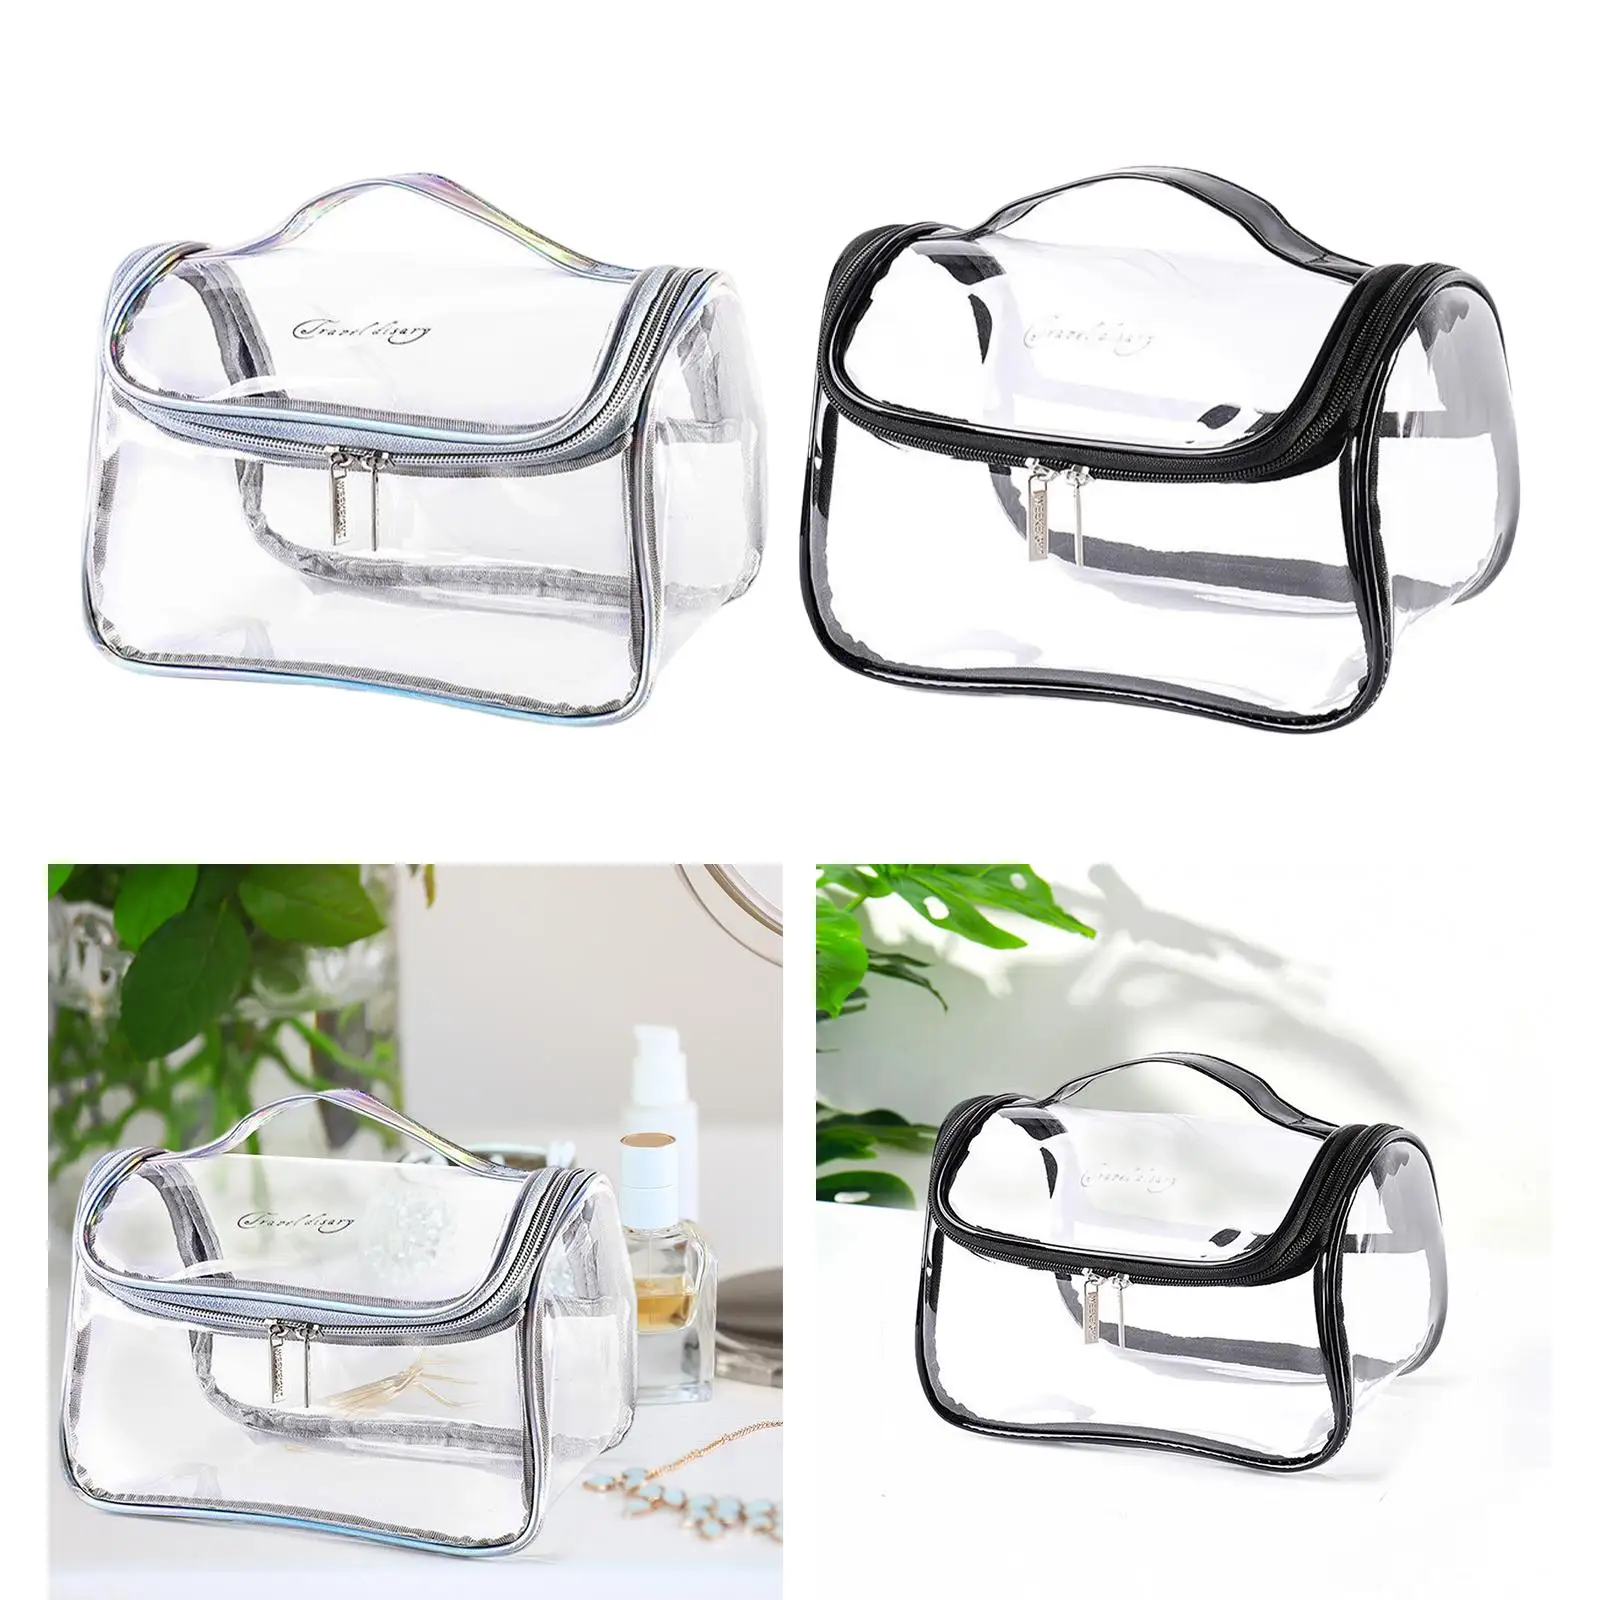 Clear Makeup Bag with Handle Travel Bag for Carry on Travel Essentials Gym